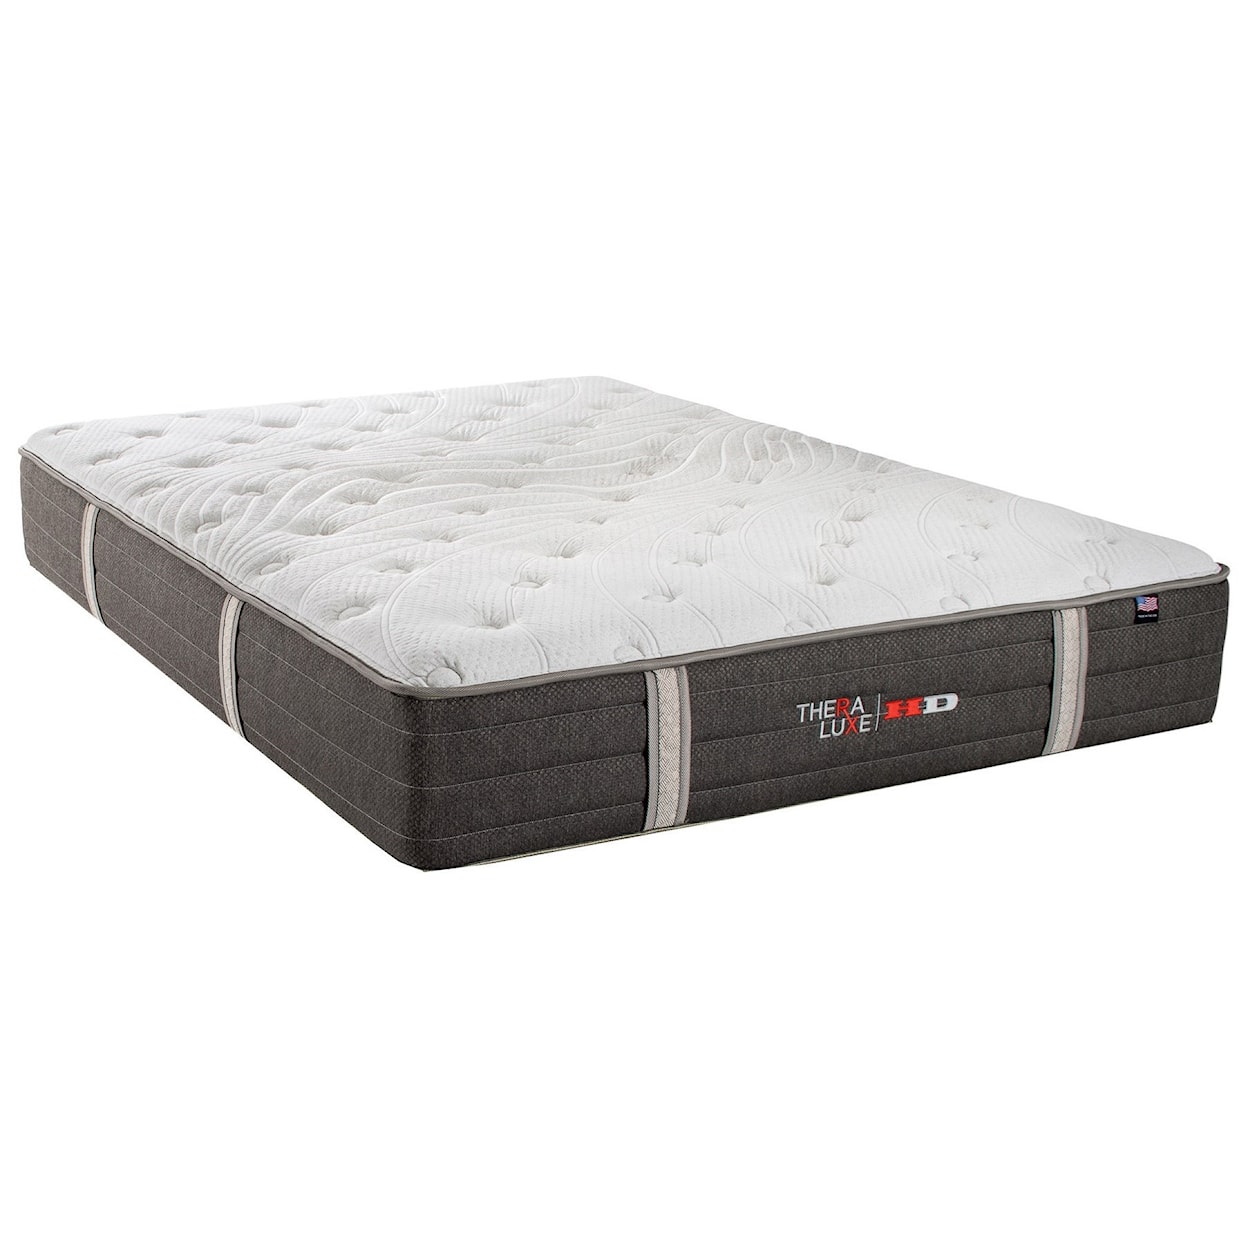 Therapedic Theraluxe Aspen Full Firm Pocketed Coil Mattress